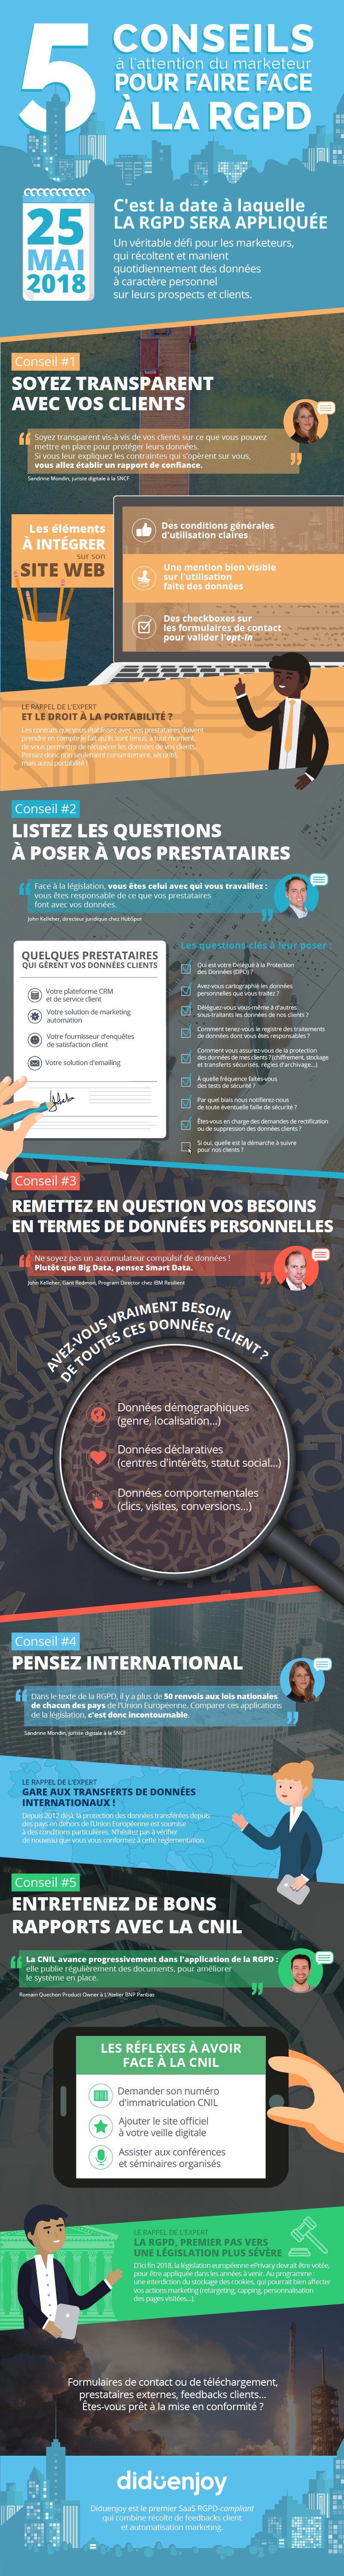 infographie rgpd conseils experts